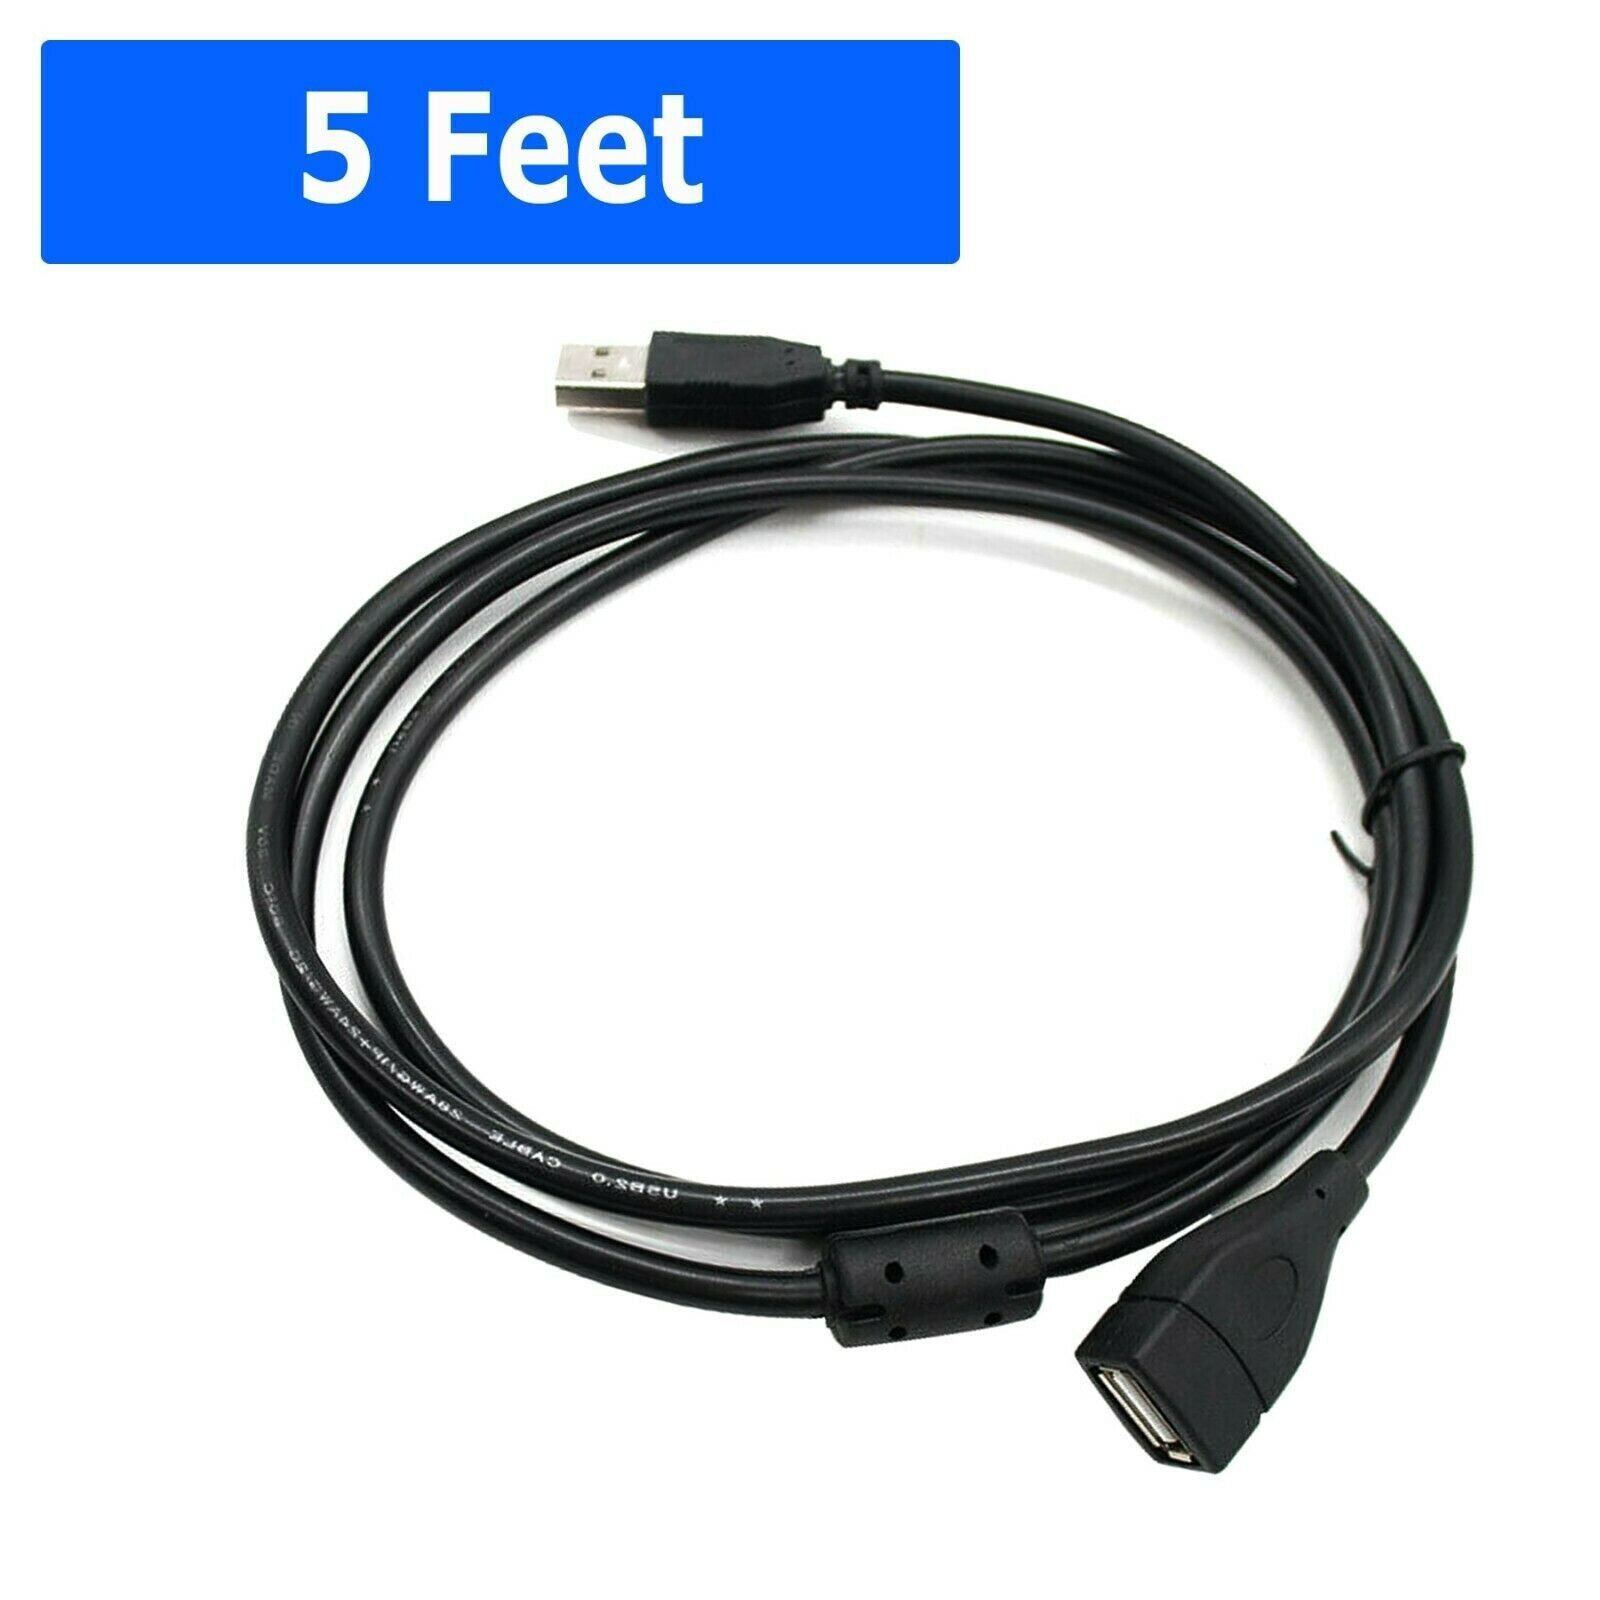 High-Speed USB Extension Cable USB 2.0 Adapter Extender Cord Male/Female 5FT